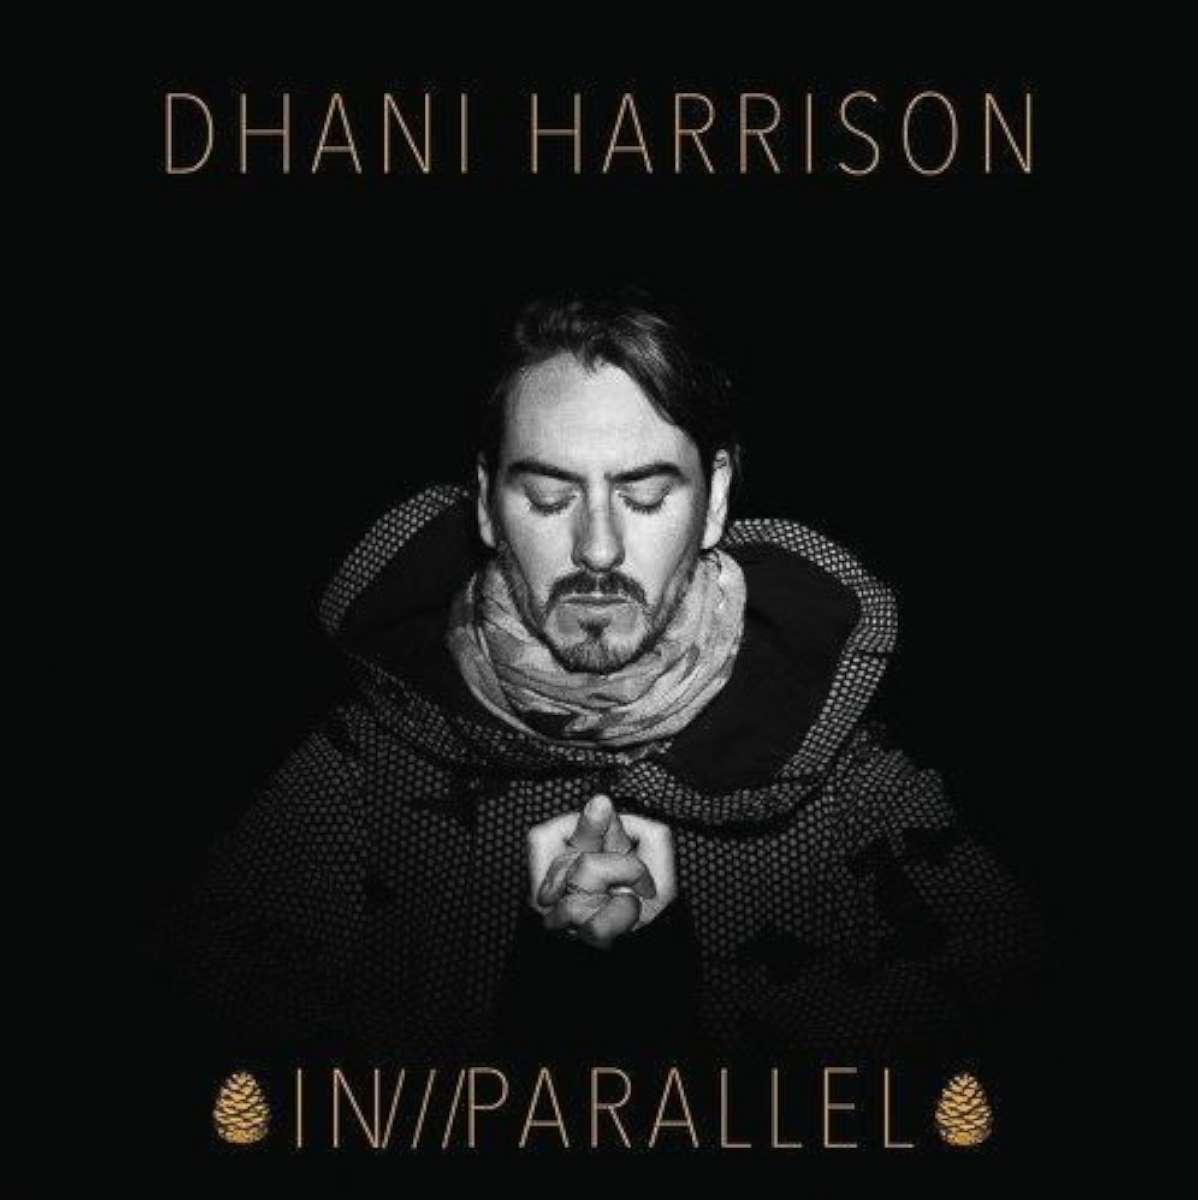 PHOTO: Dhani Harrison - "IN///PARALLEL" 